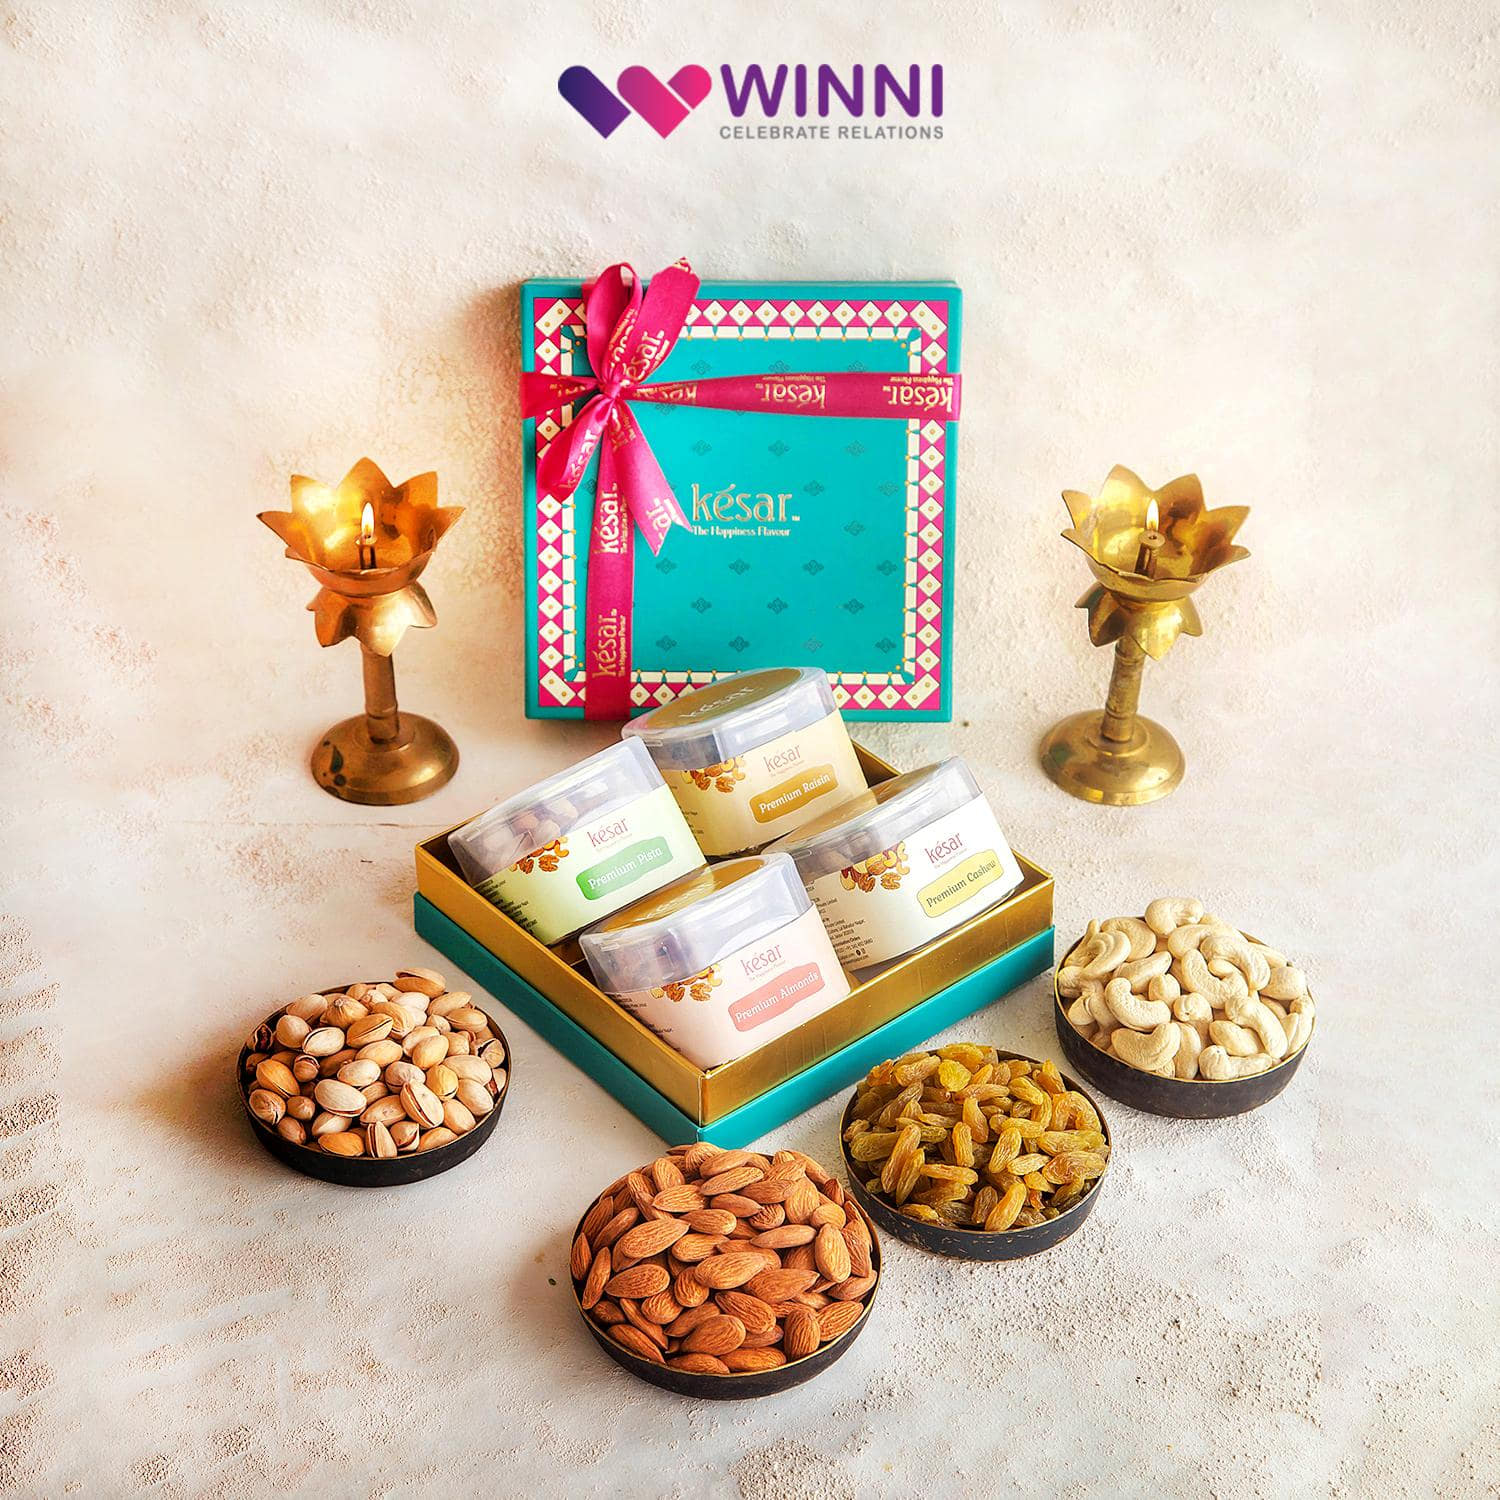 This Diwali Gift Pack contains: Kiwi Slices 125g, Mango Slices 125g,  Pineapple Rings 125g, Apricots 125g, Black Pepper & Mint Cashew 125g,  Roasted Cashew & Almond Mix 125g. – RawFruit®